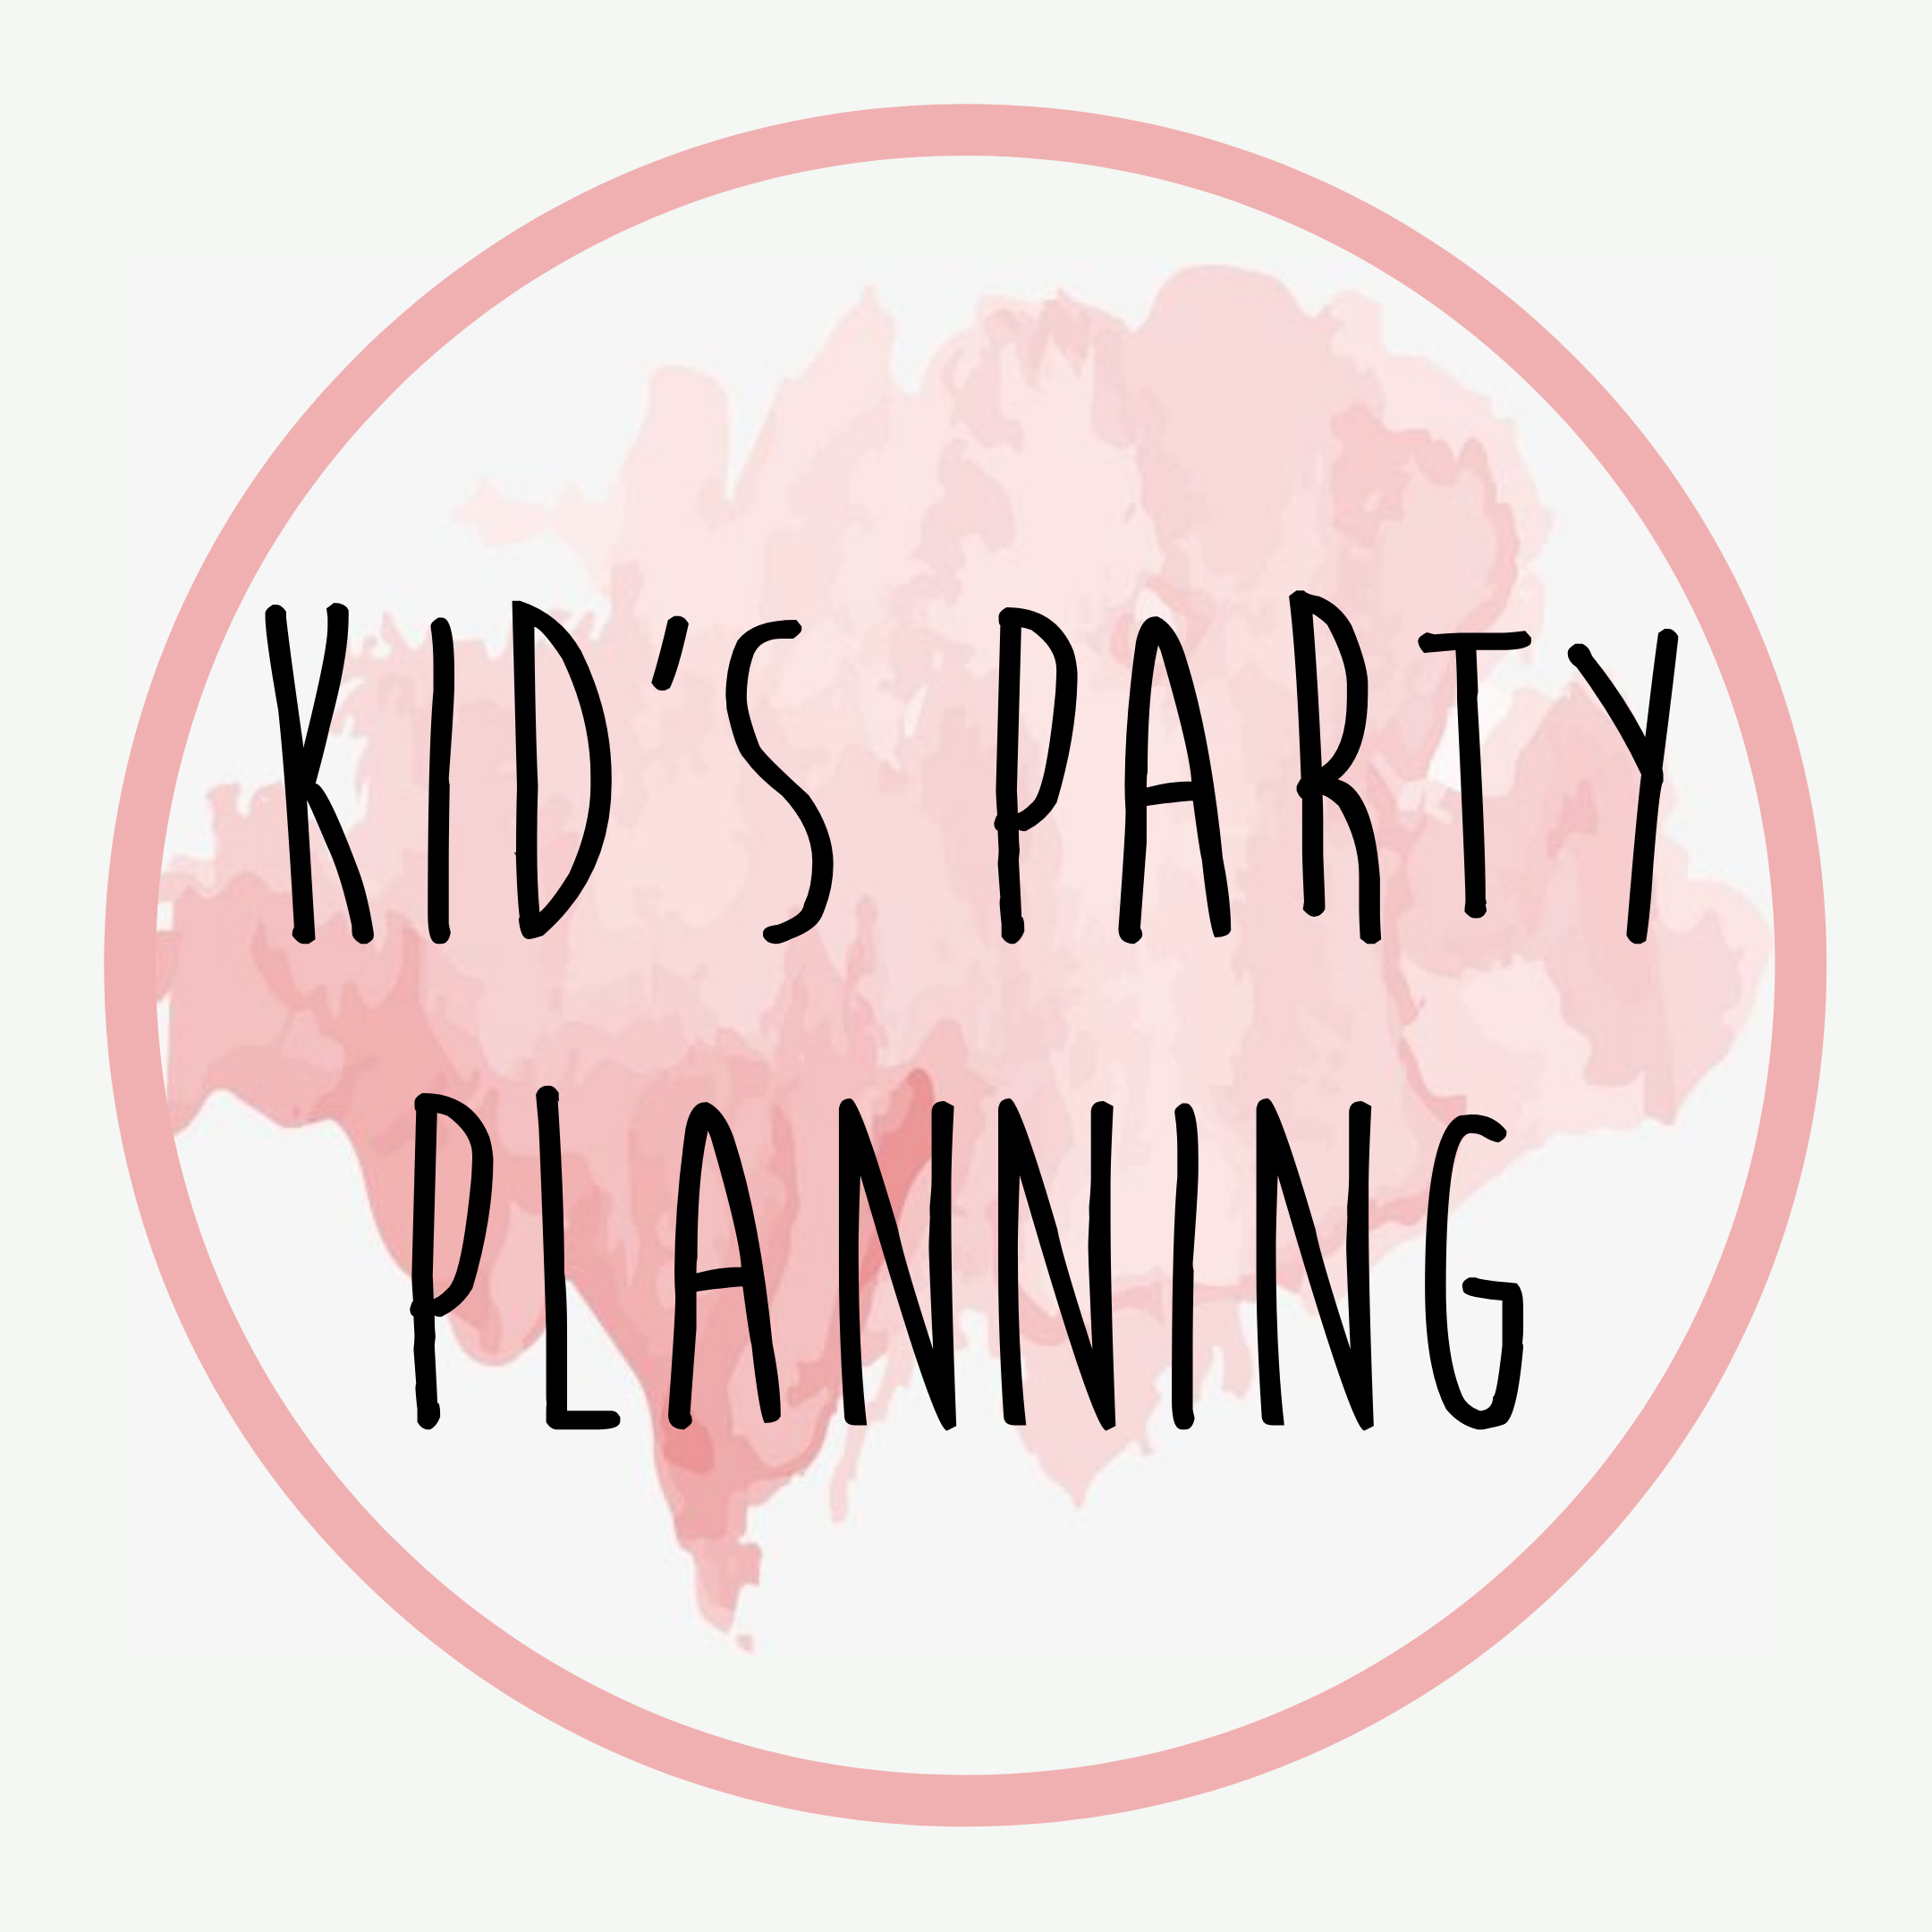 Kid's party planning